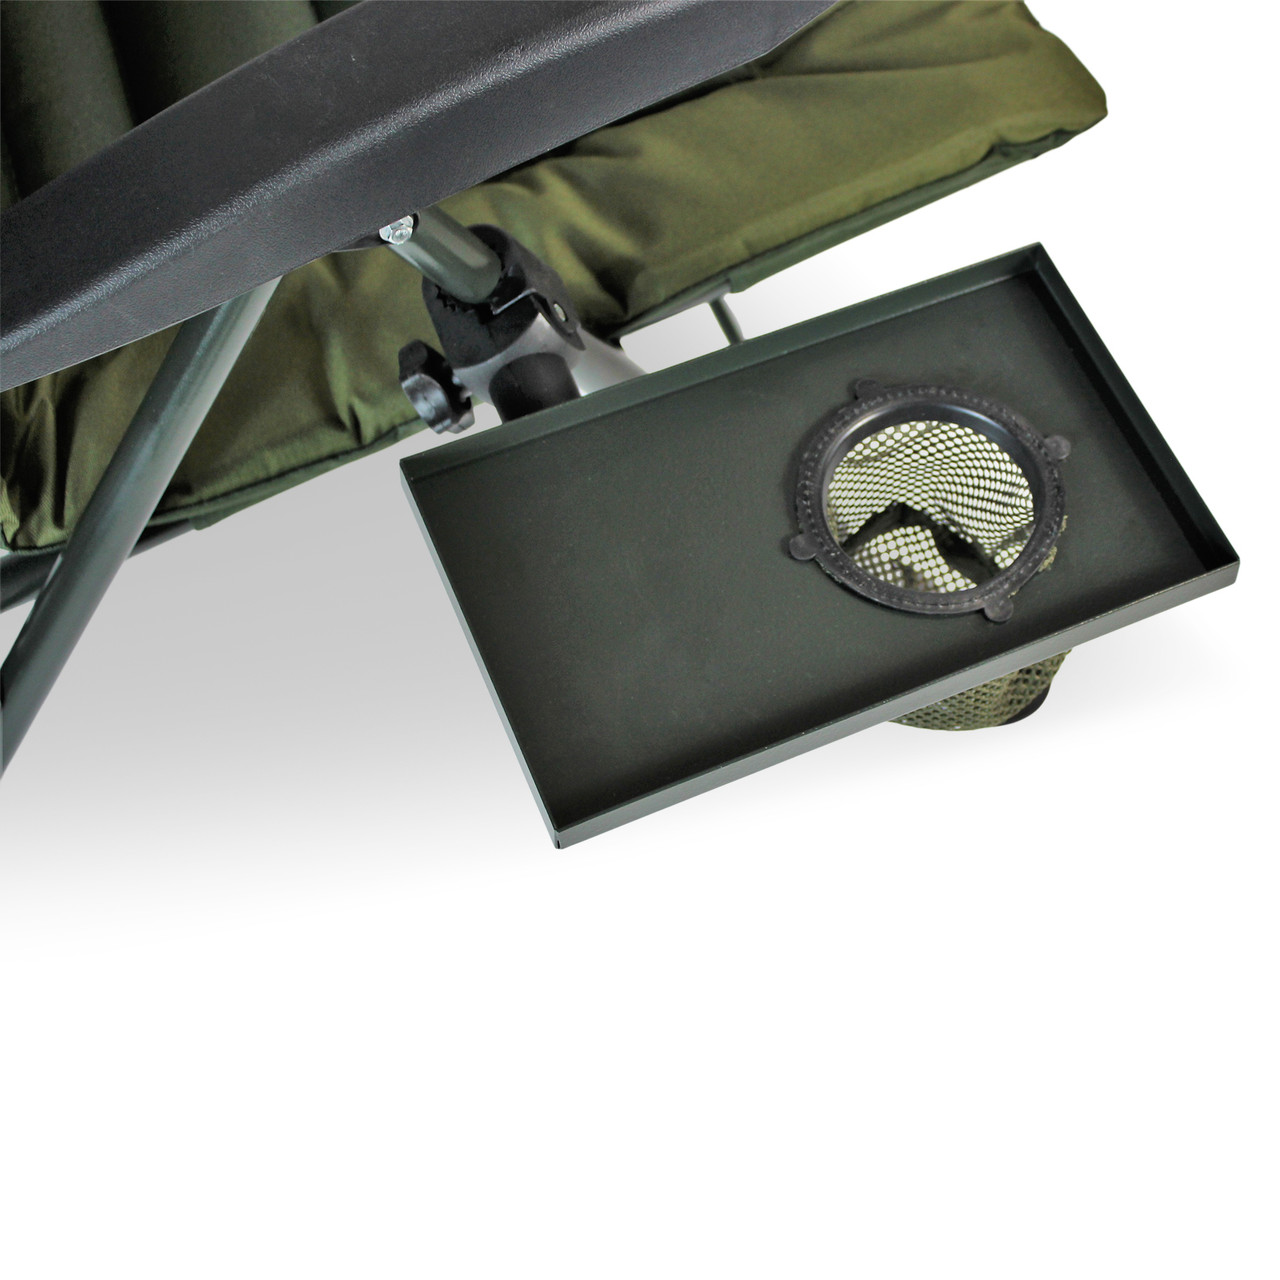 CLAMP ON CARP Chair or Seat Box Fishing Camping - £0.99 - PicClick UK